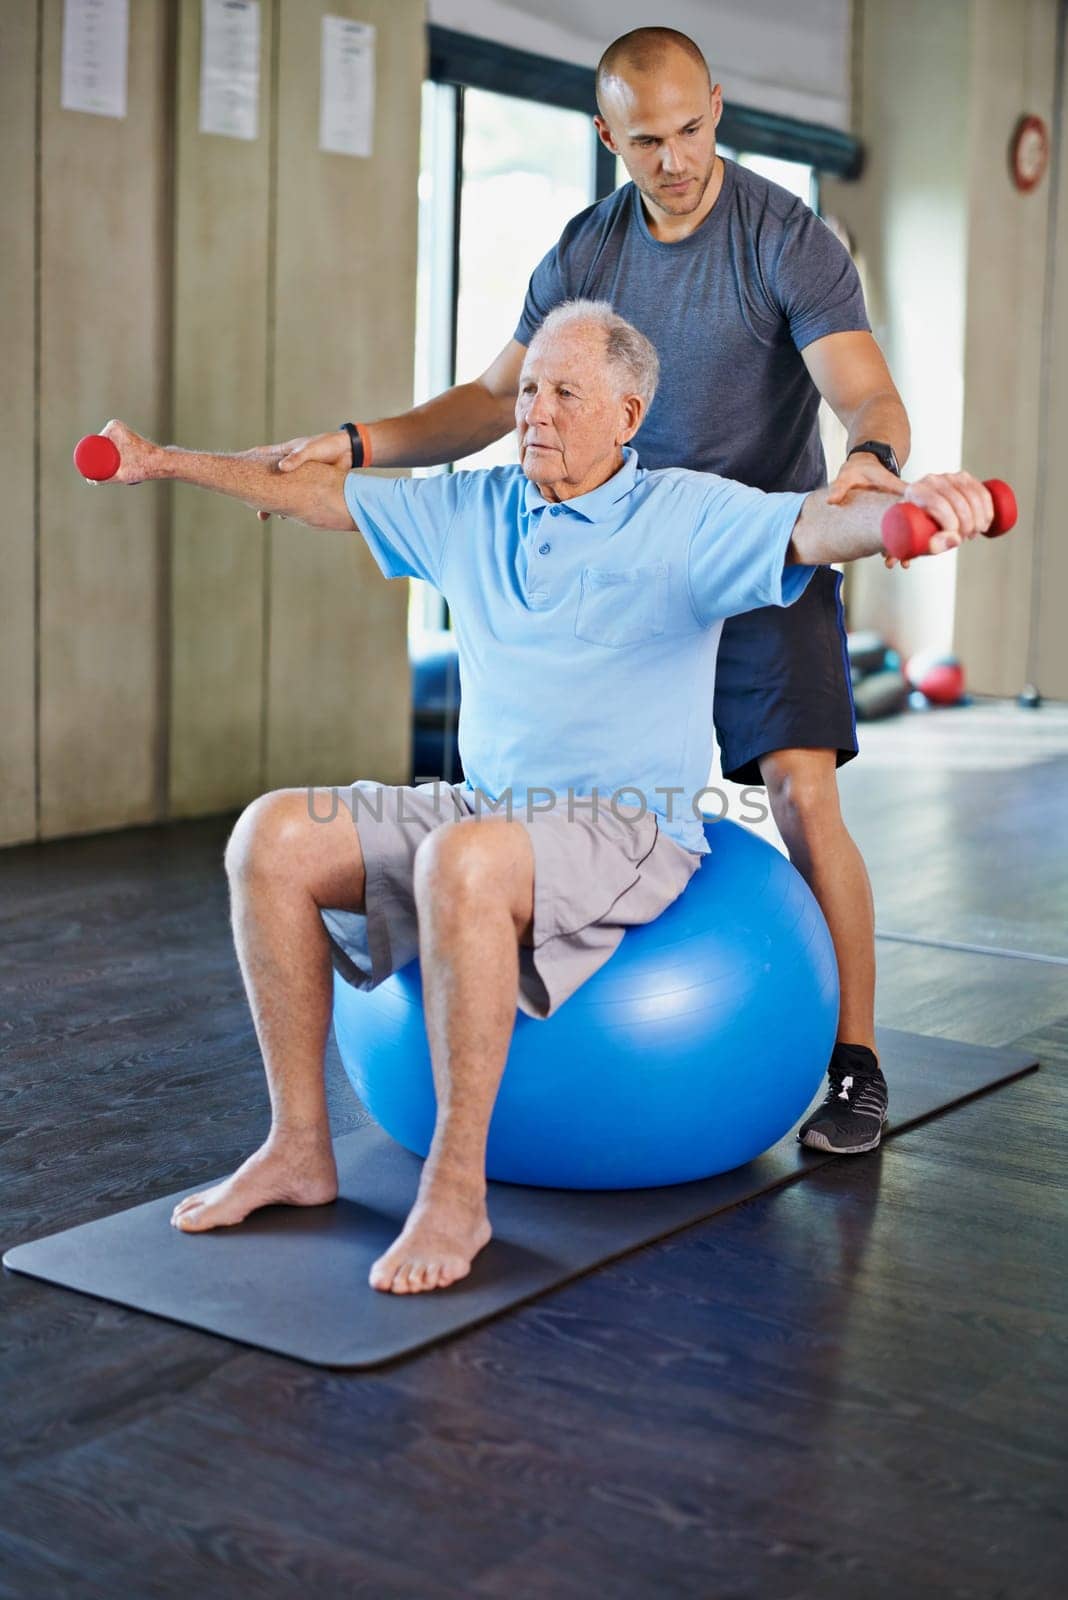 Physiotherapist, helping and senior man with weights, training and elderly support for care. Men, gym and exercise for health, wellness and coaching with yoga ball for mature rehab and wellbeing by YuriArcurs